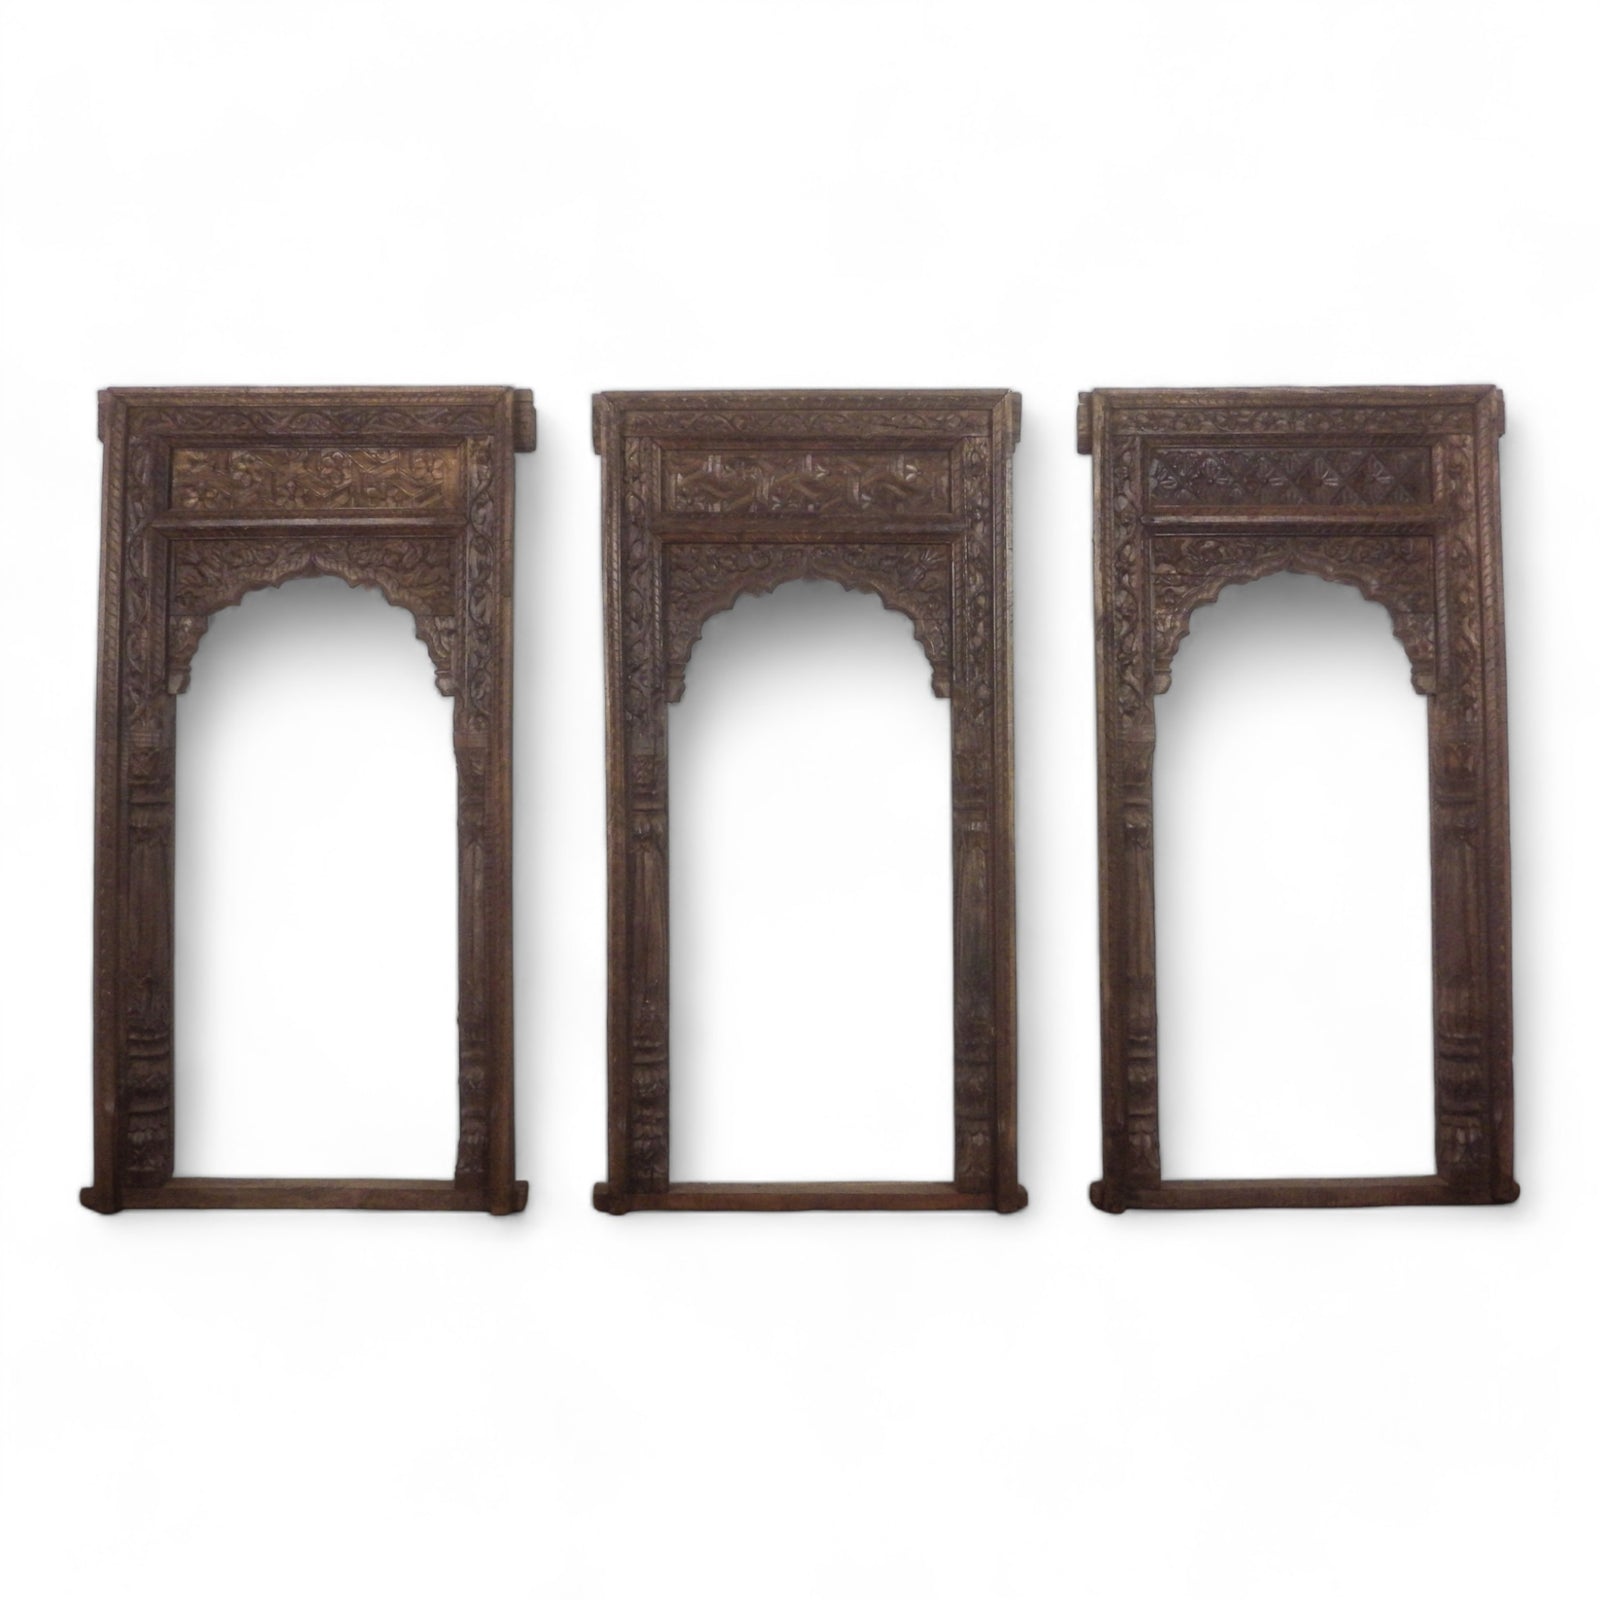 MILL-844/2 Wooden Arch C26